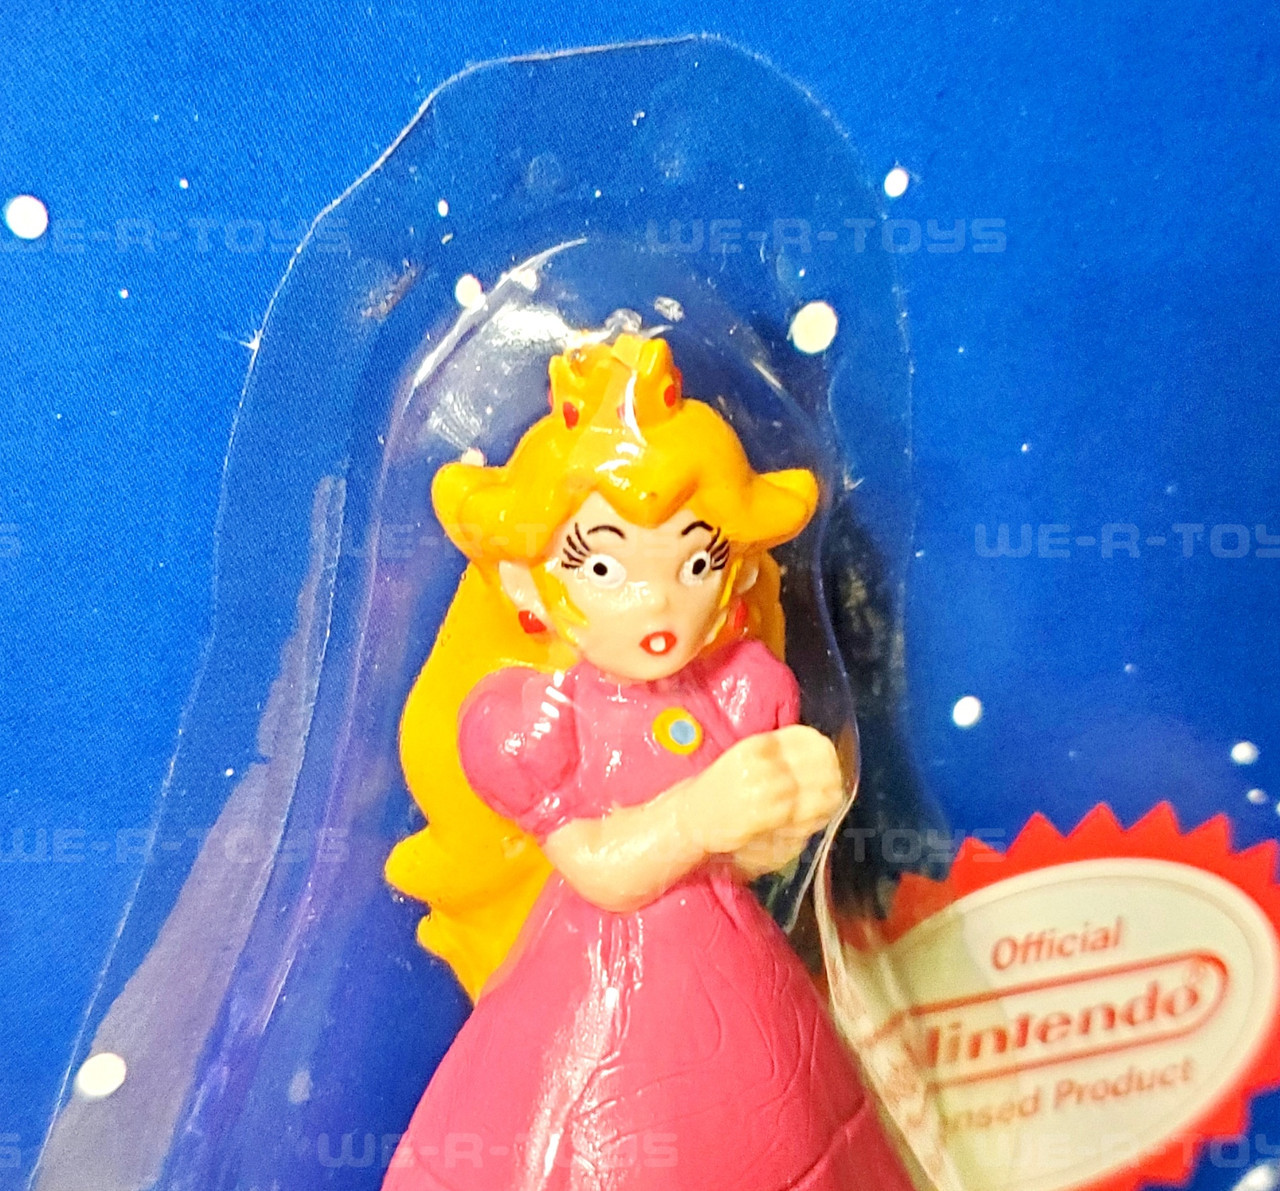 Peach amiibo (Super Mario Bros Series) - THIS PRODUCT IS NOT A TOY